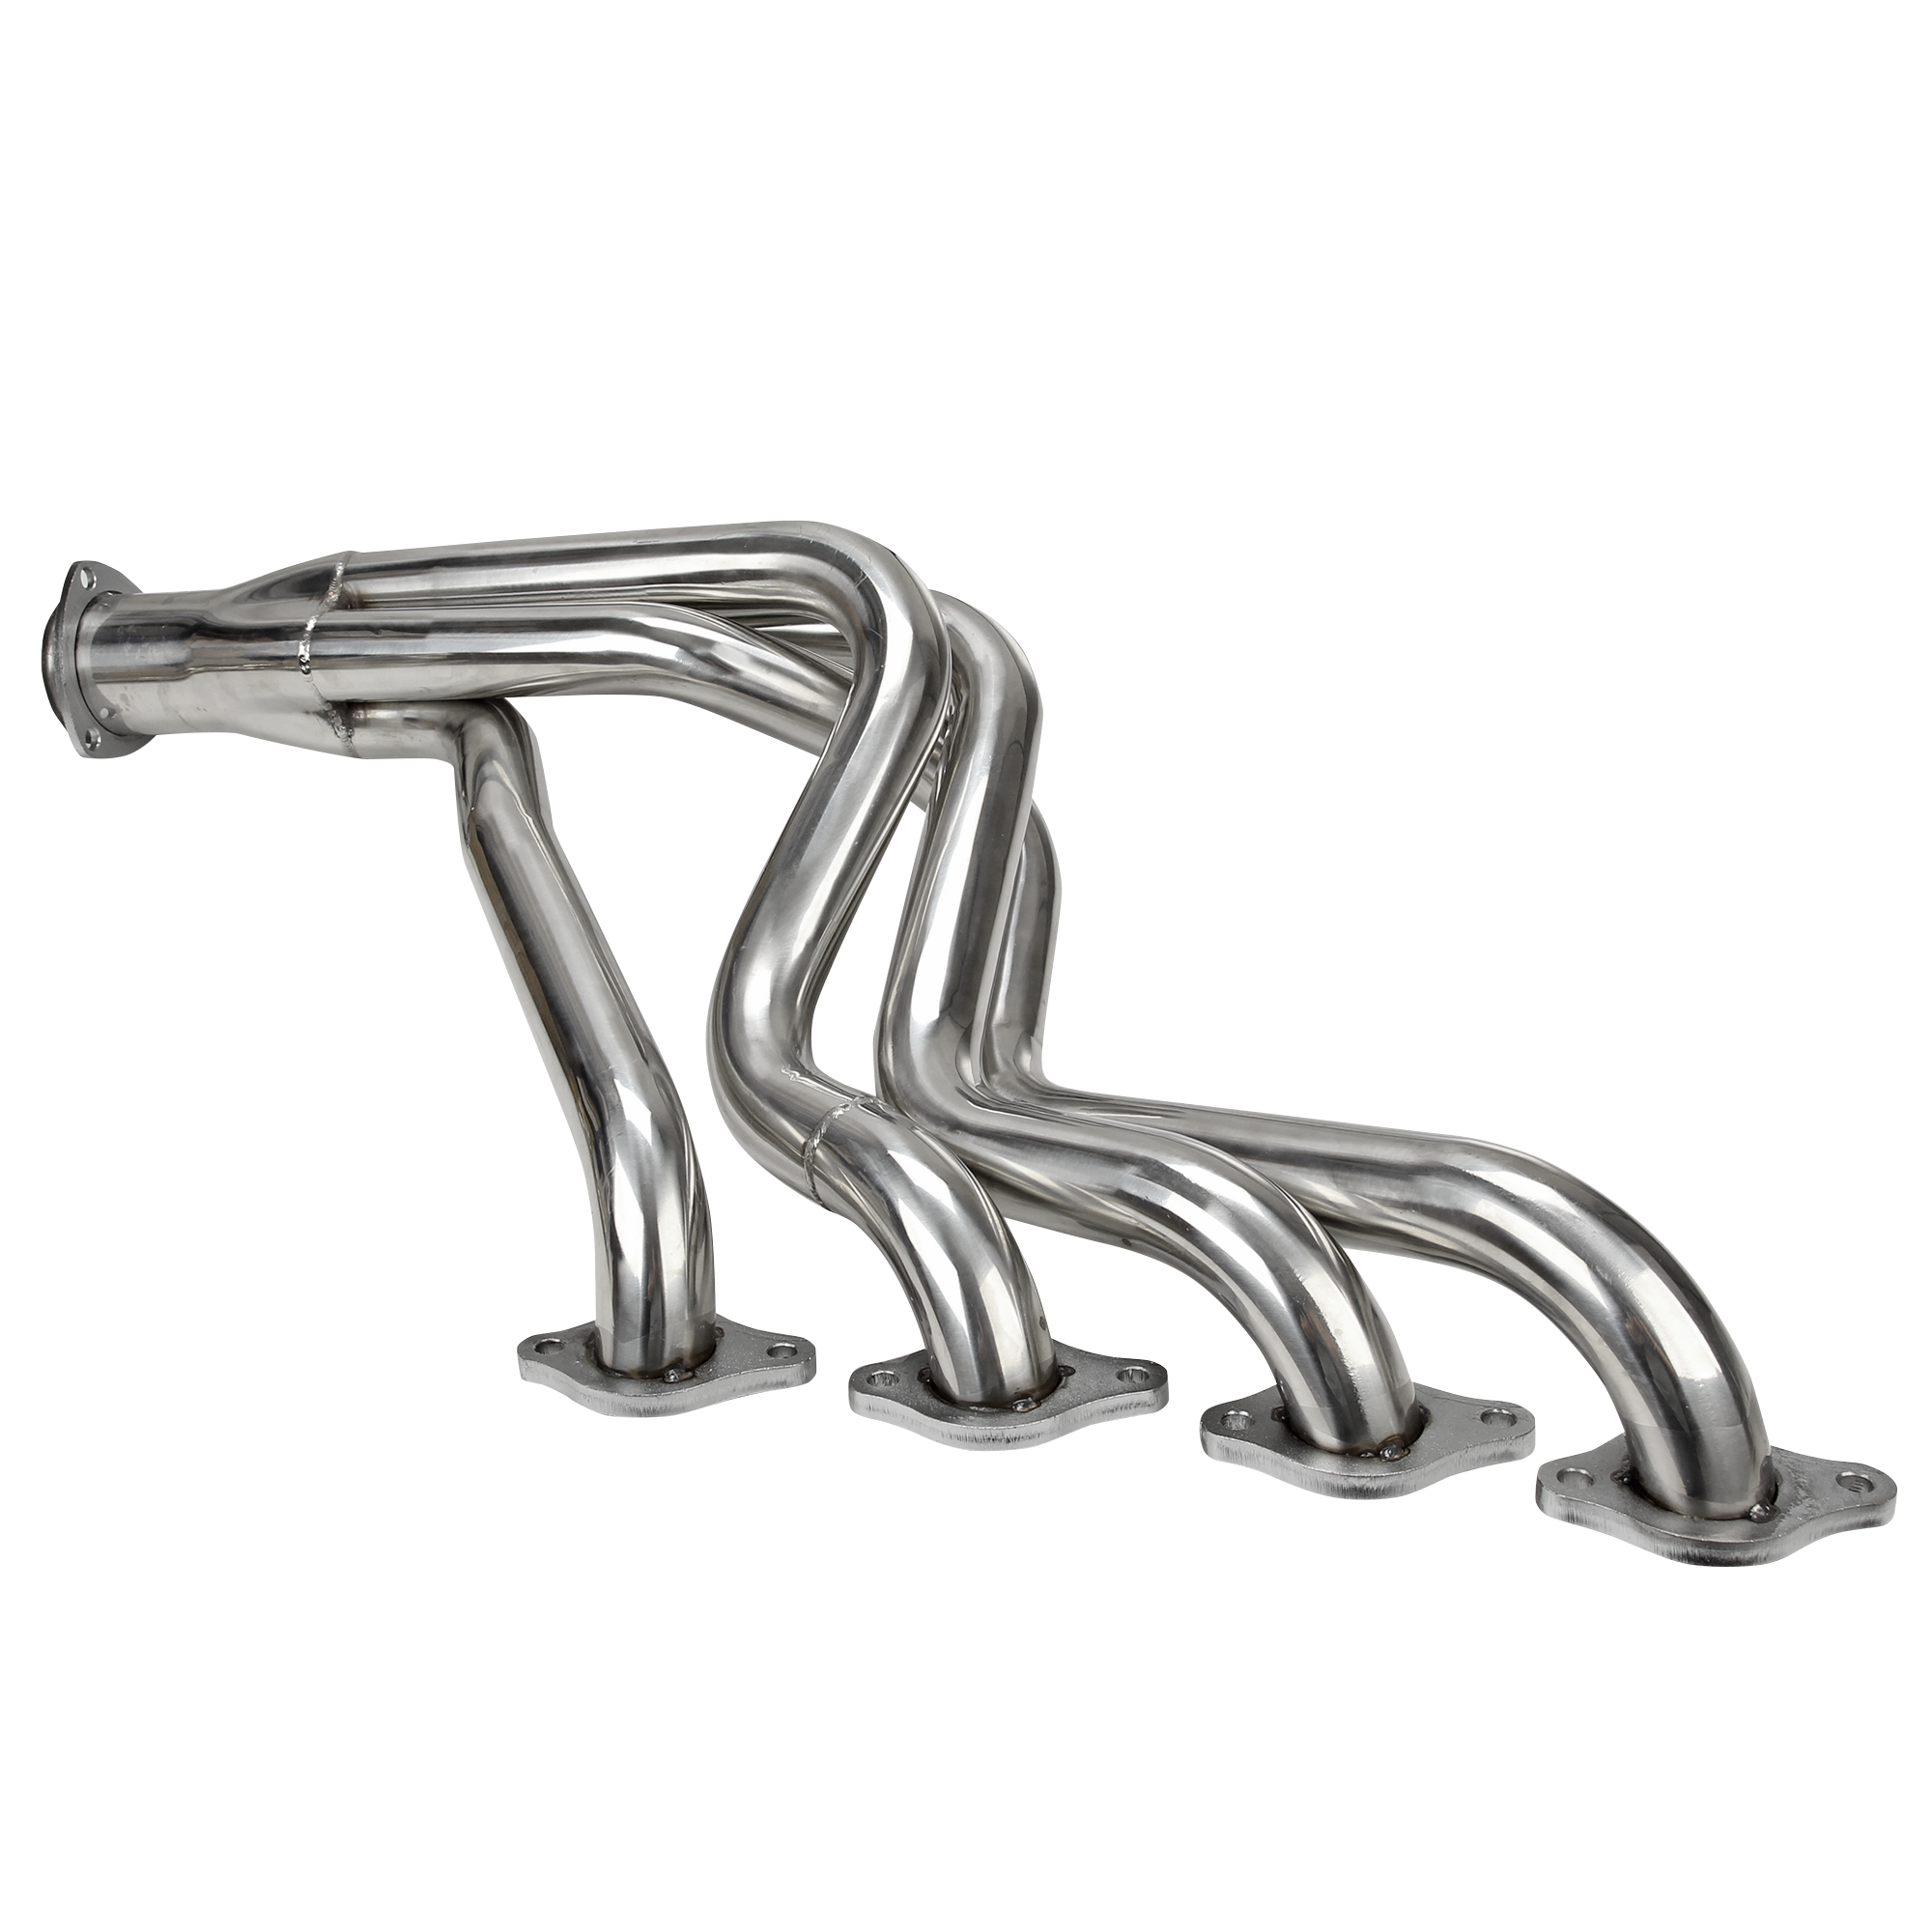 Exhaust Header, Full-Length, Steel, Painted for Chevy, GMC, SUV, Pickup, 396, 402, 427, 454, Pair